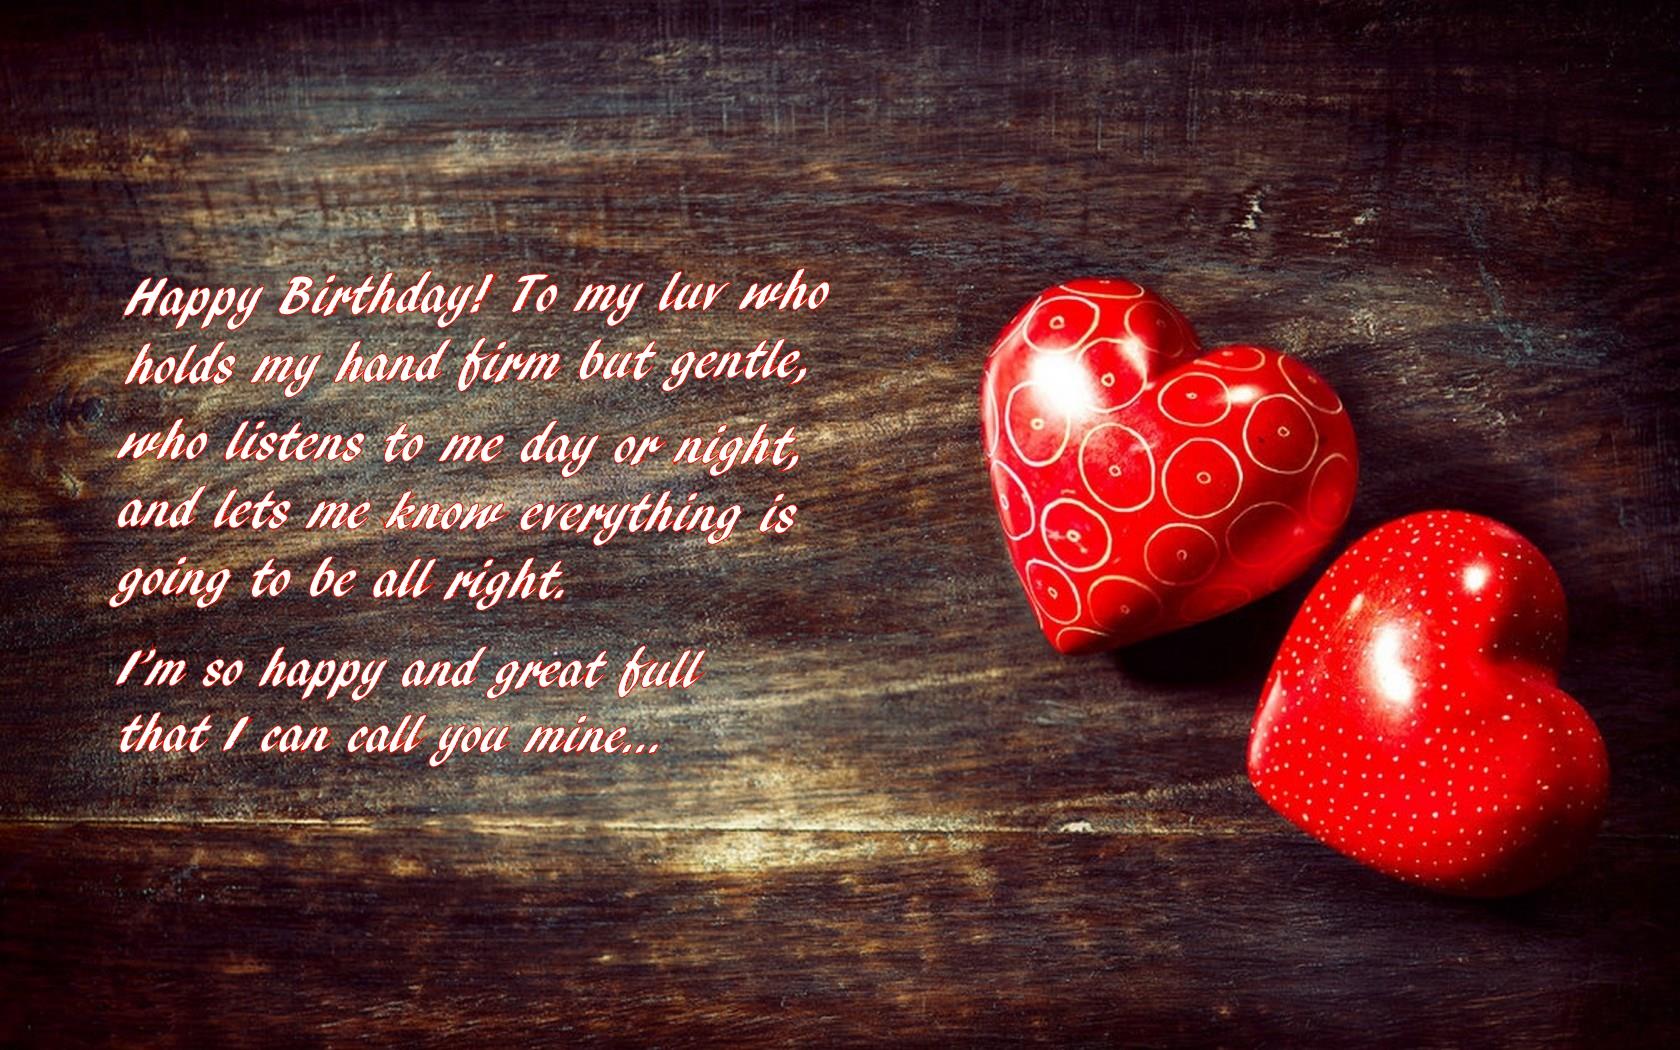 Express Love With Quotes Wallpaper Image